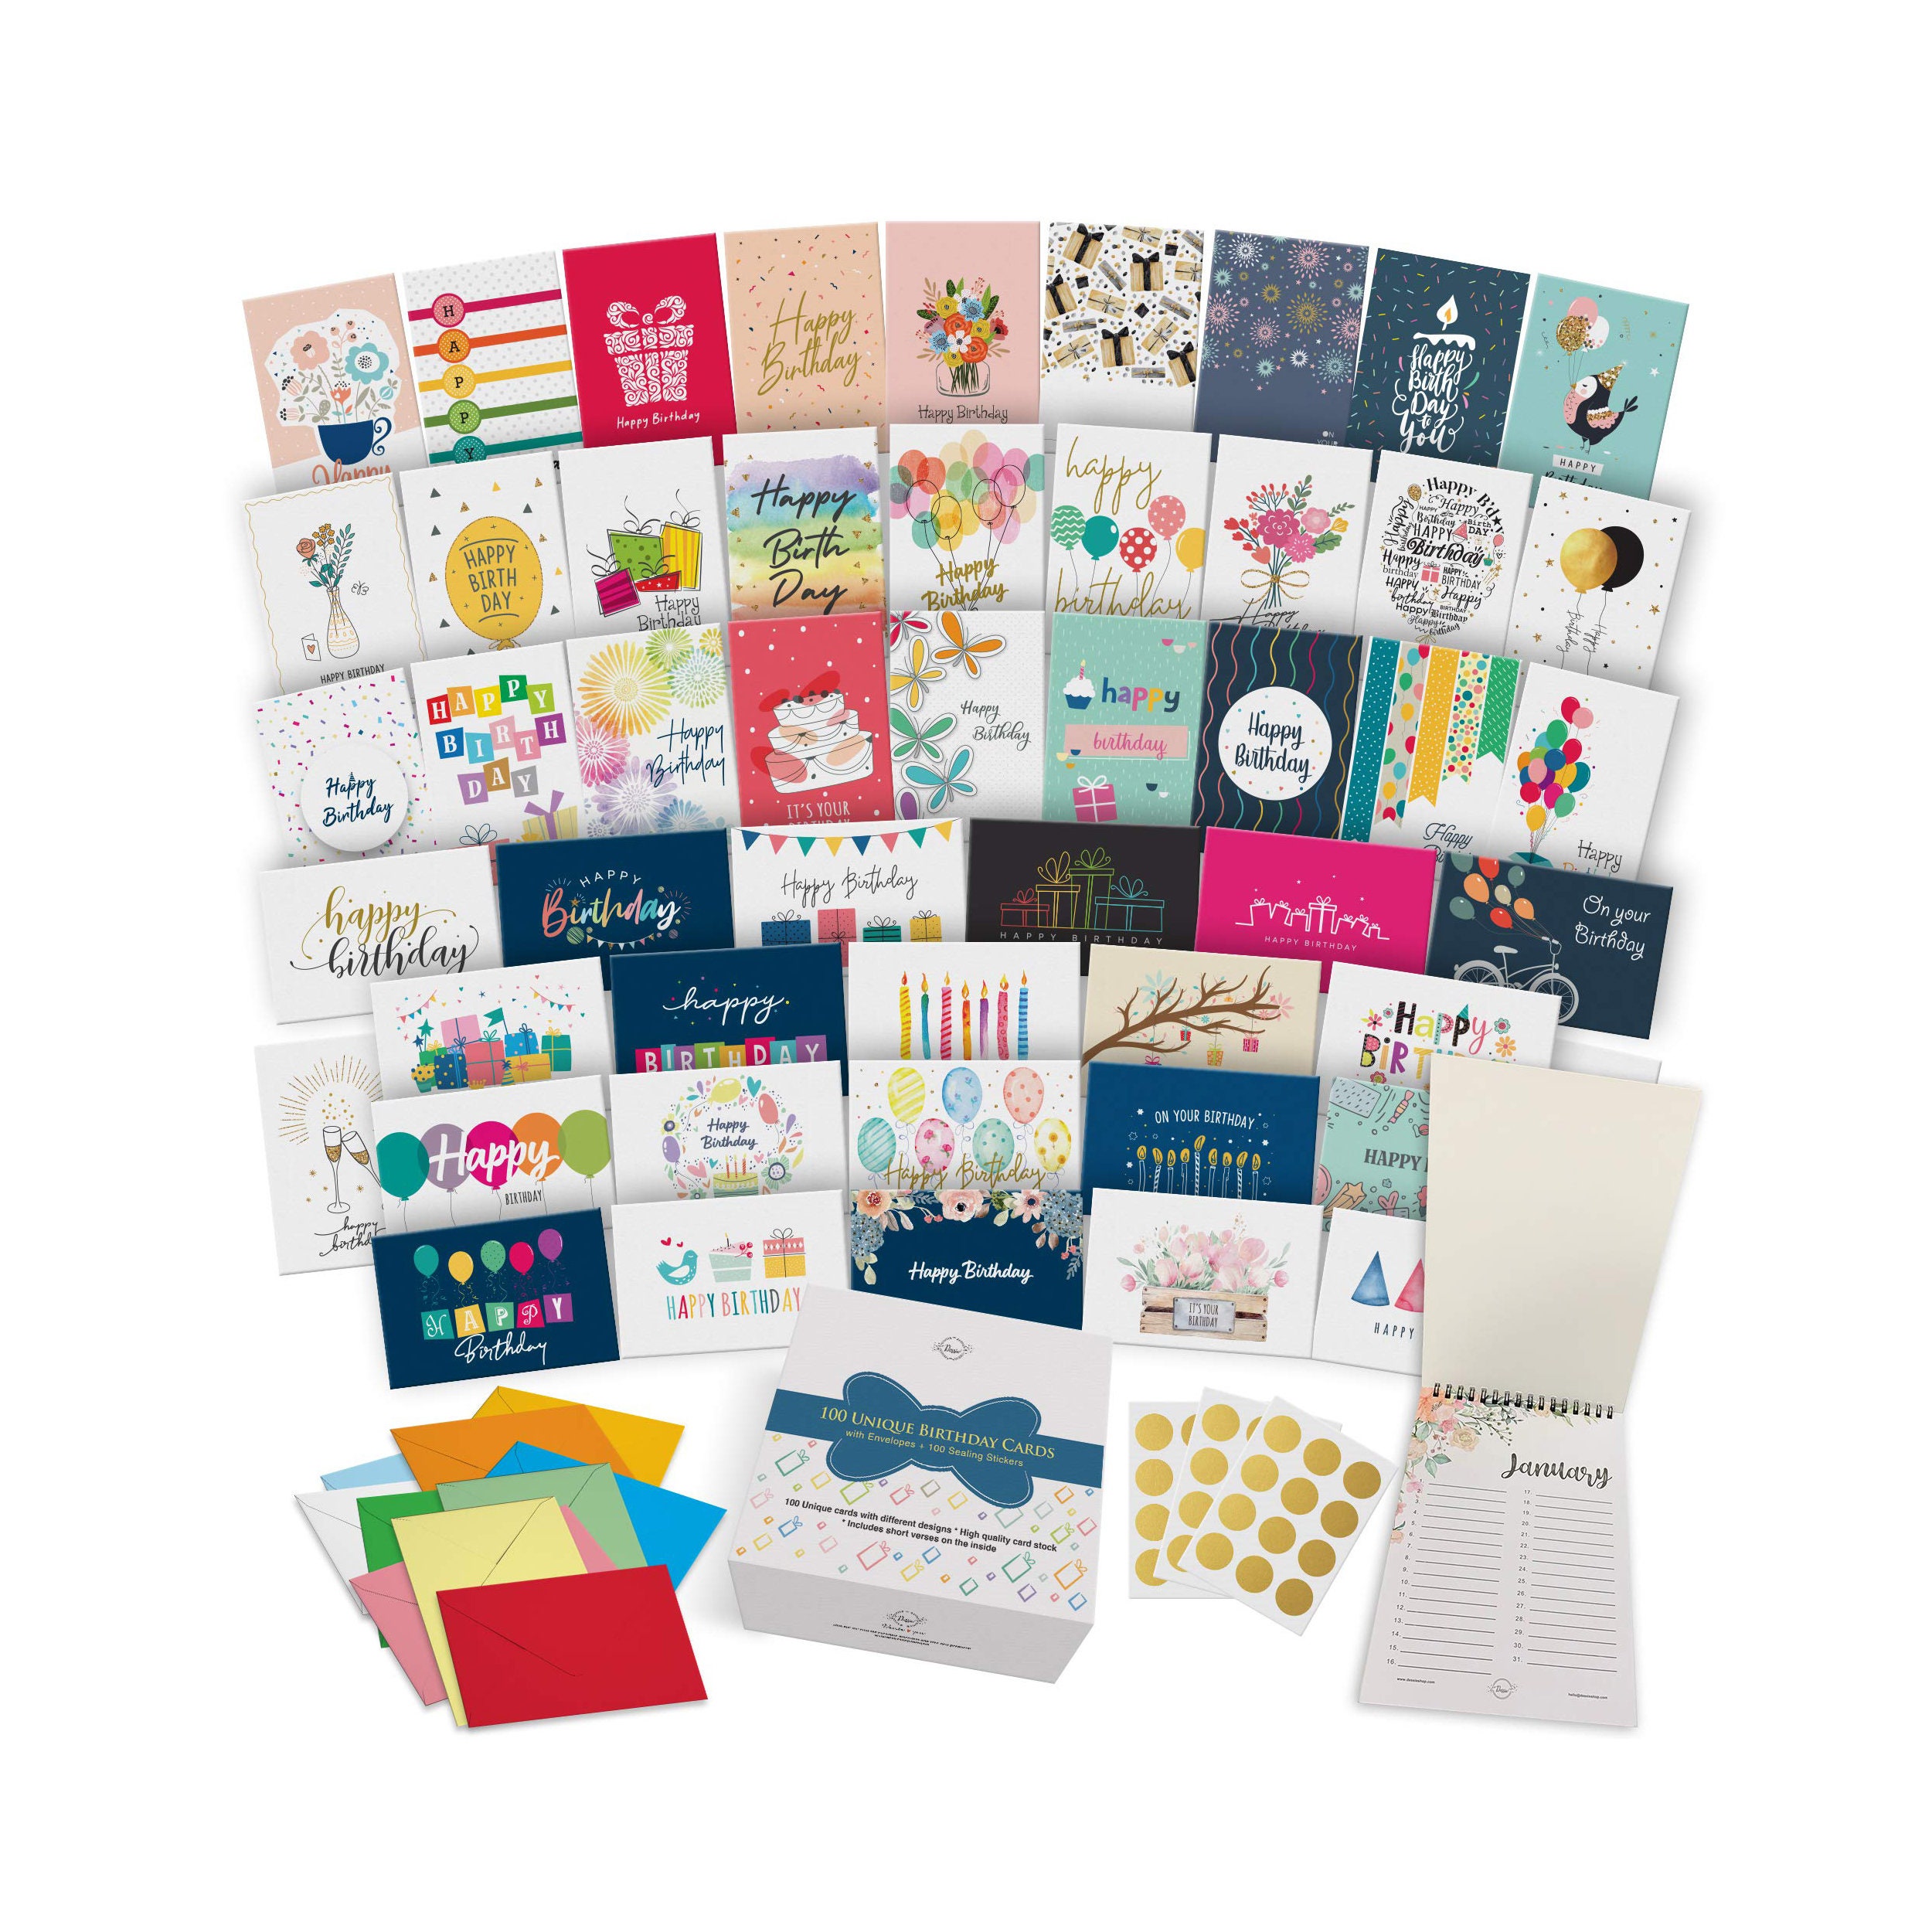  Dessie 60 Unique Large Greeting Cards Assortment with